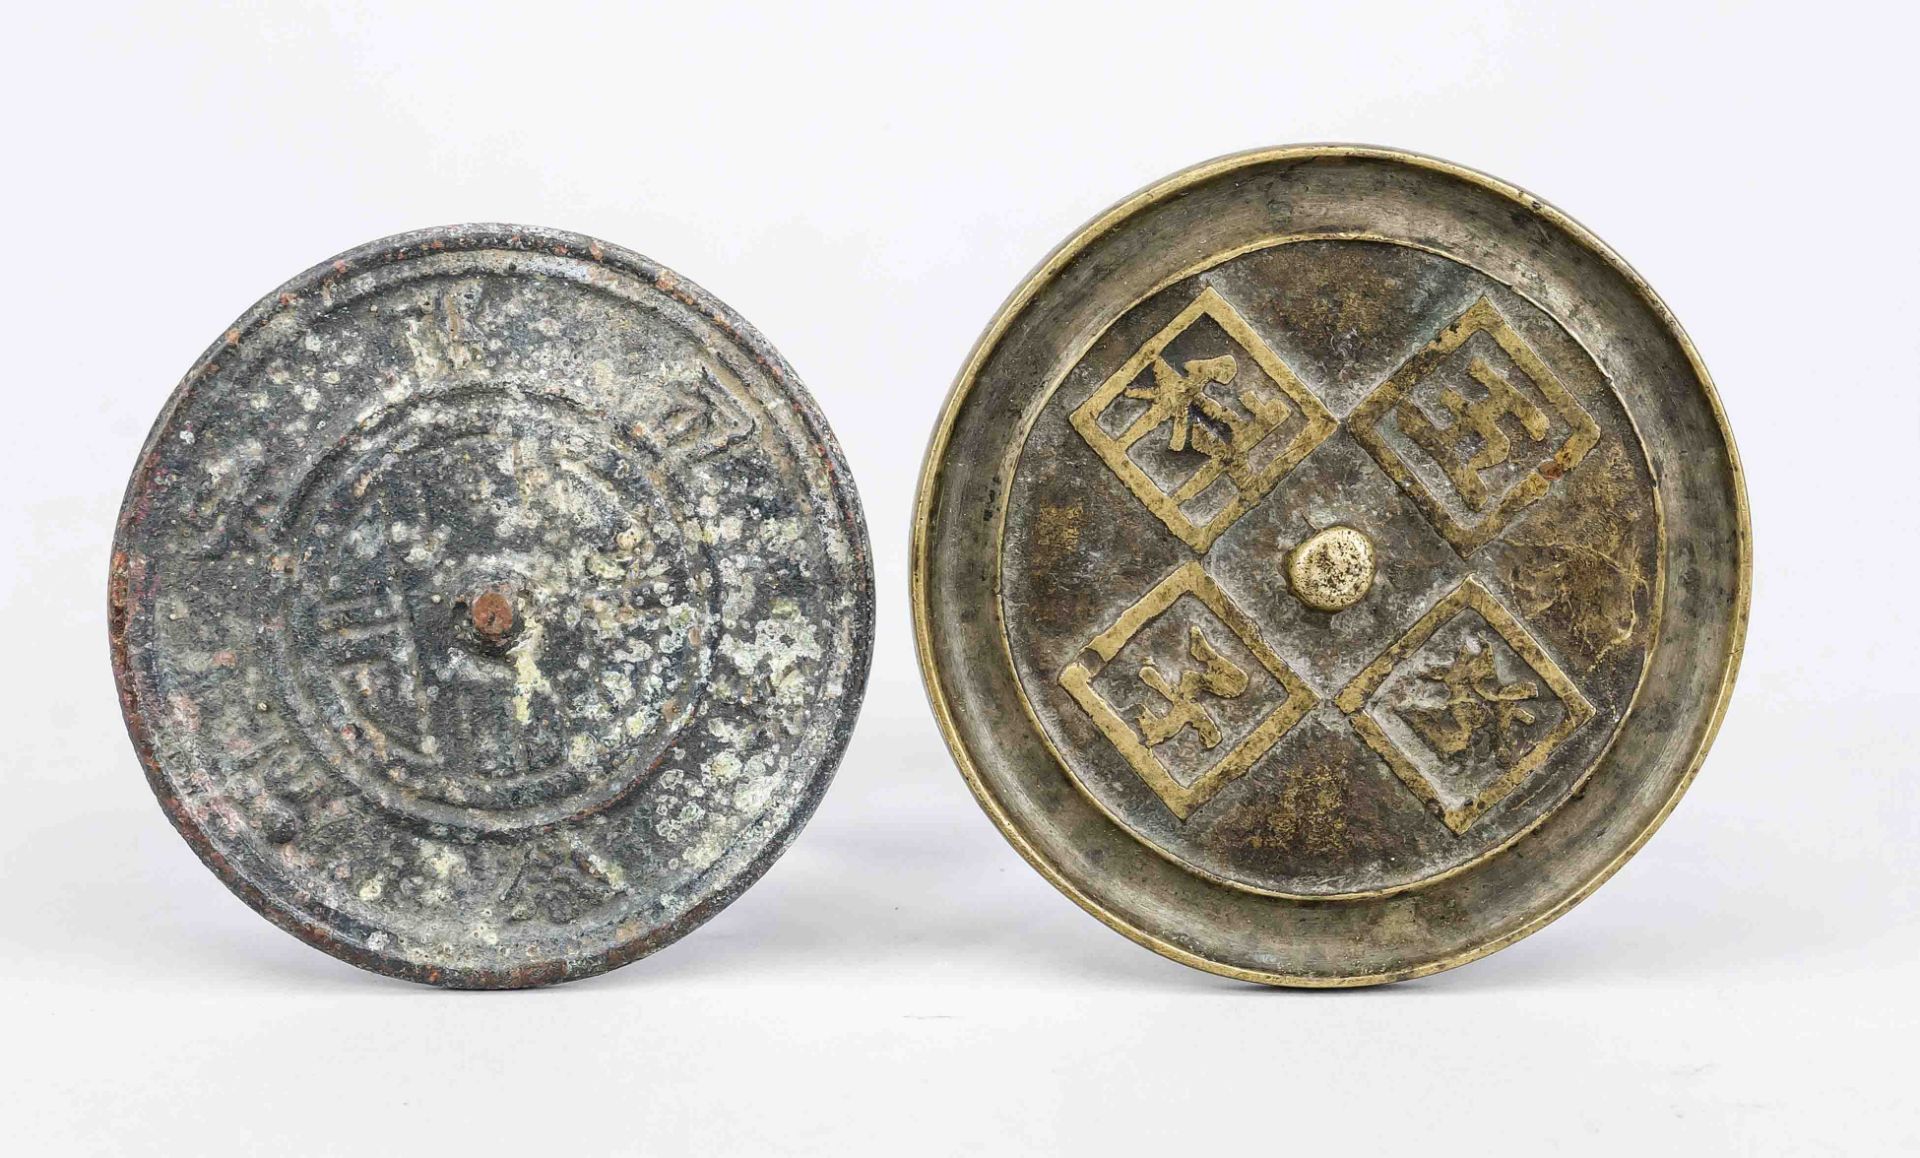 2 ritual mirrors, China 18th/19th century (Qing), brass and bronze, cycle decoration and characters,